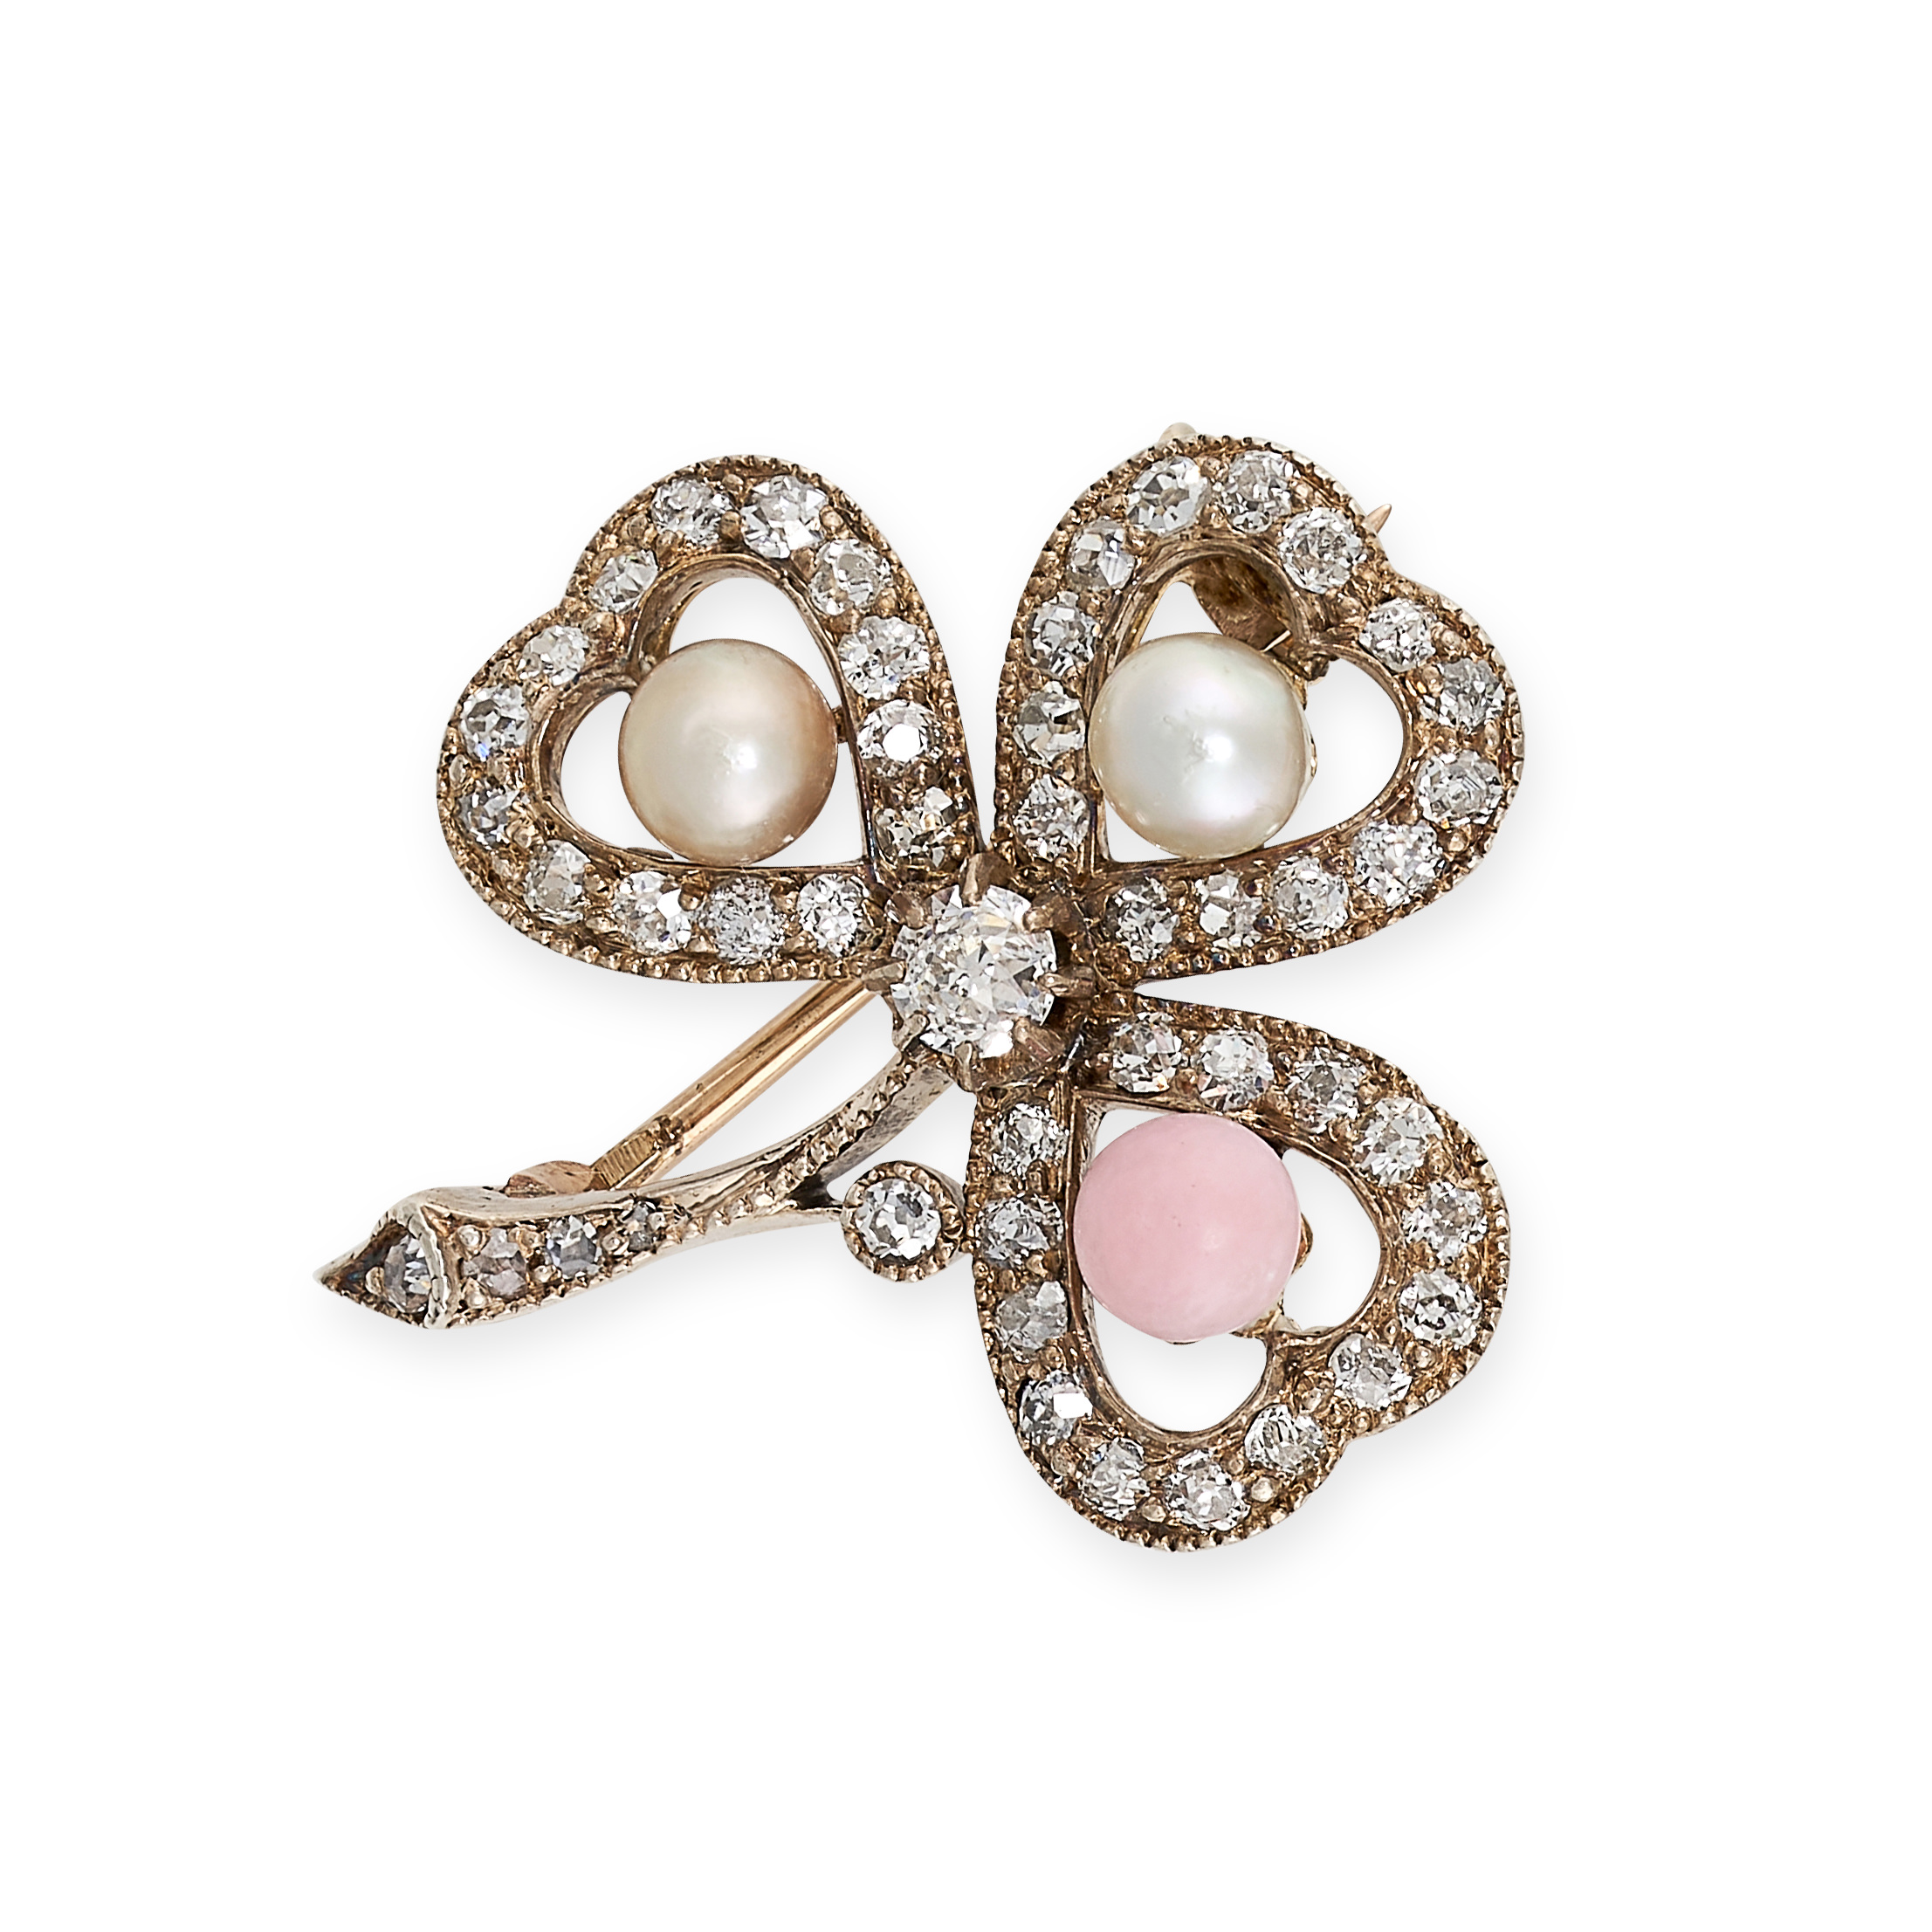 AN ANTIQUE CONCH PEARL, PEARL AND DIAMOND SHAMROCK BROOCH in yellow gold and silver, set with a trio